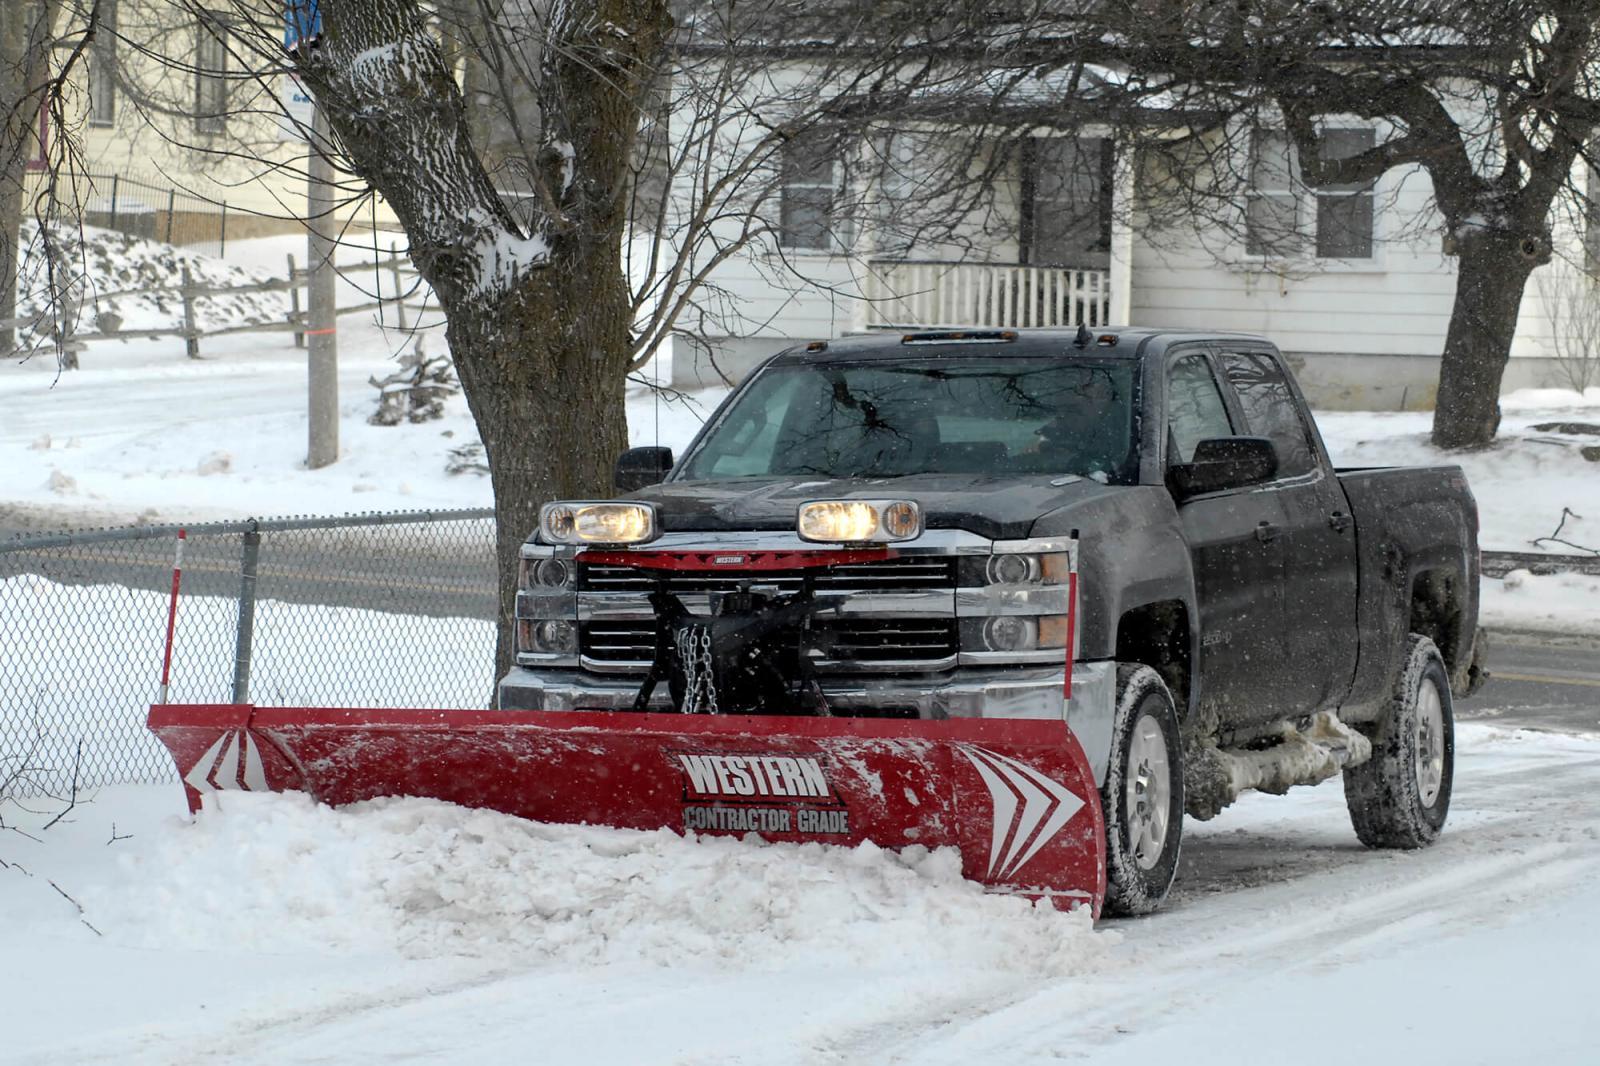 Snow removal contractors are being targeted this winter.